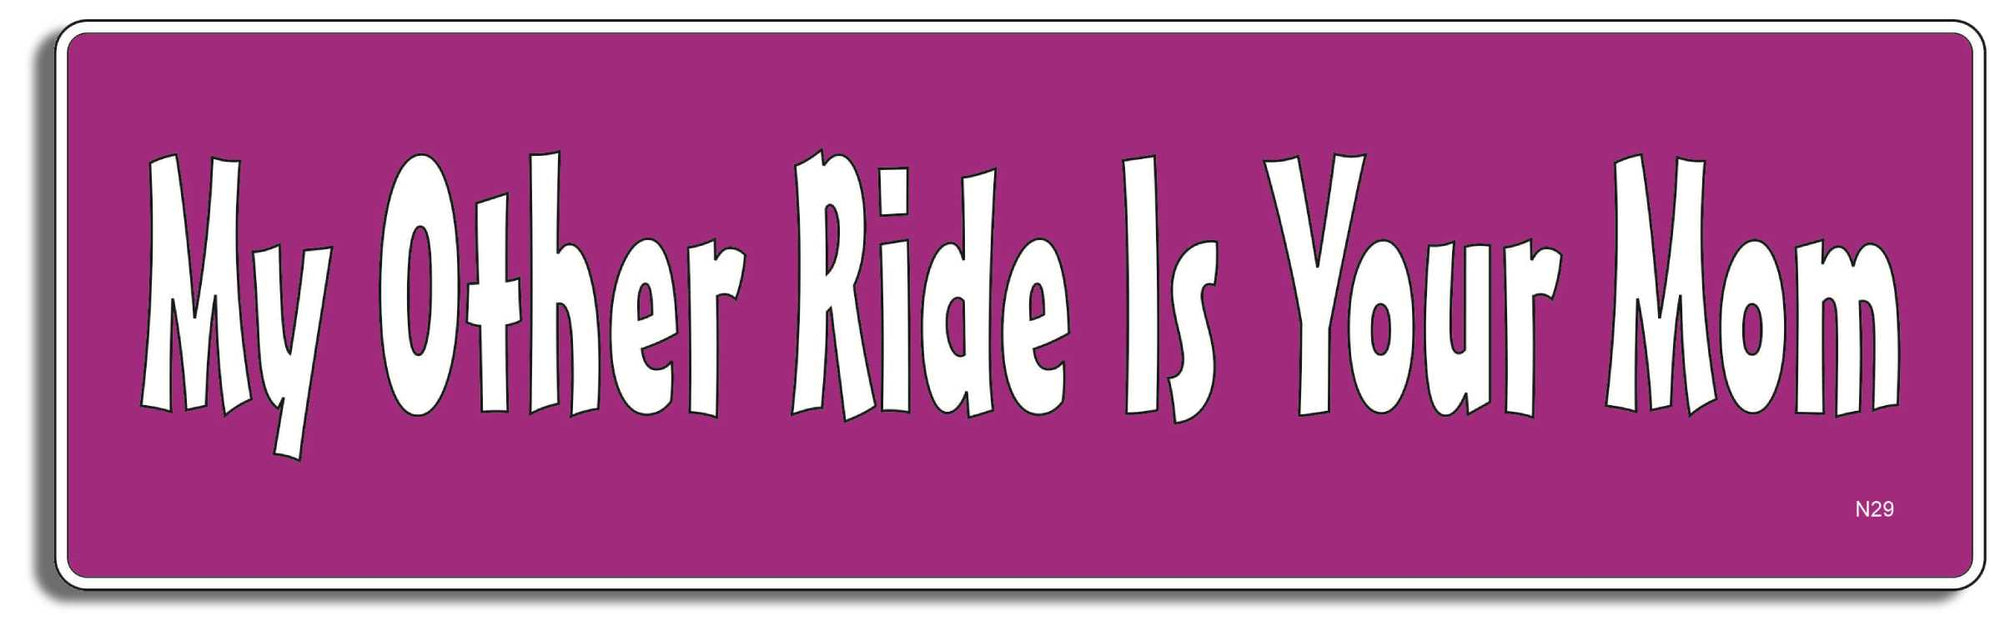 My Other Ride Is Your Mom - 3" x 10" -  Decal Bumper Sticker-dirty Bumper Sticker Car Magnet My Other Ride Is Your Mom-  Decal for carsadult, funny, funny quote, funny saying, naughty